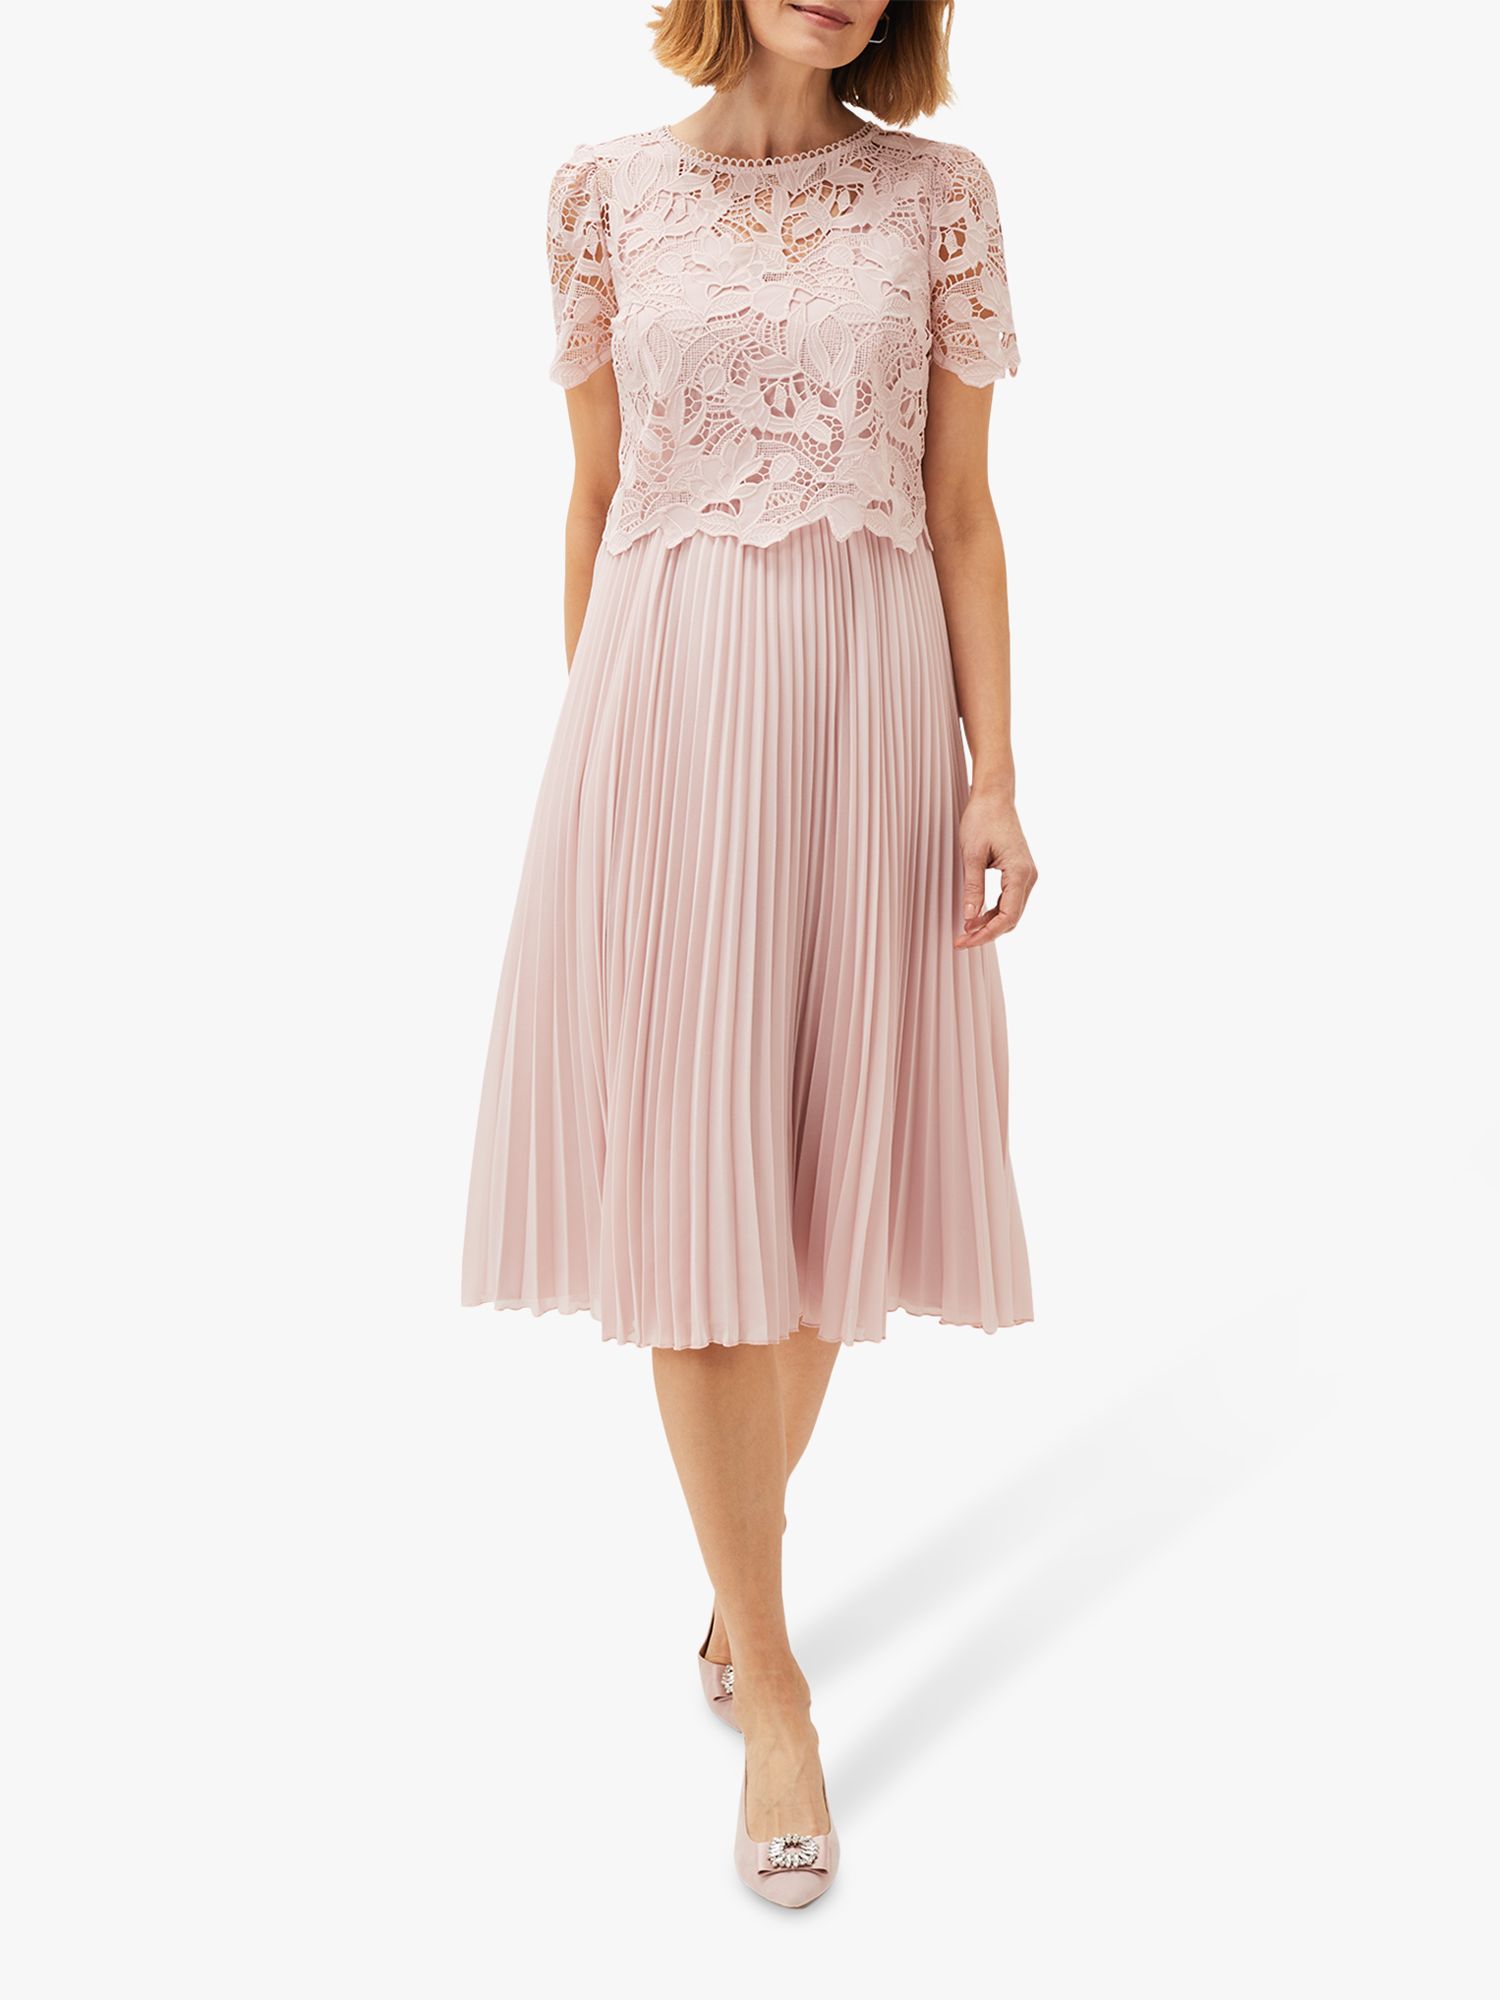 Phase Eight Samina Floral Lace Pleated Dress, Antique Rose